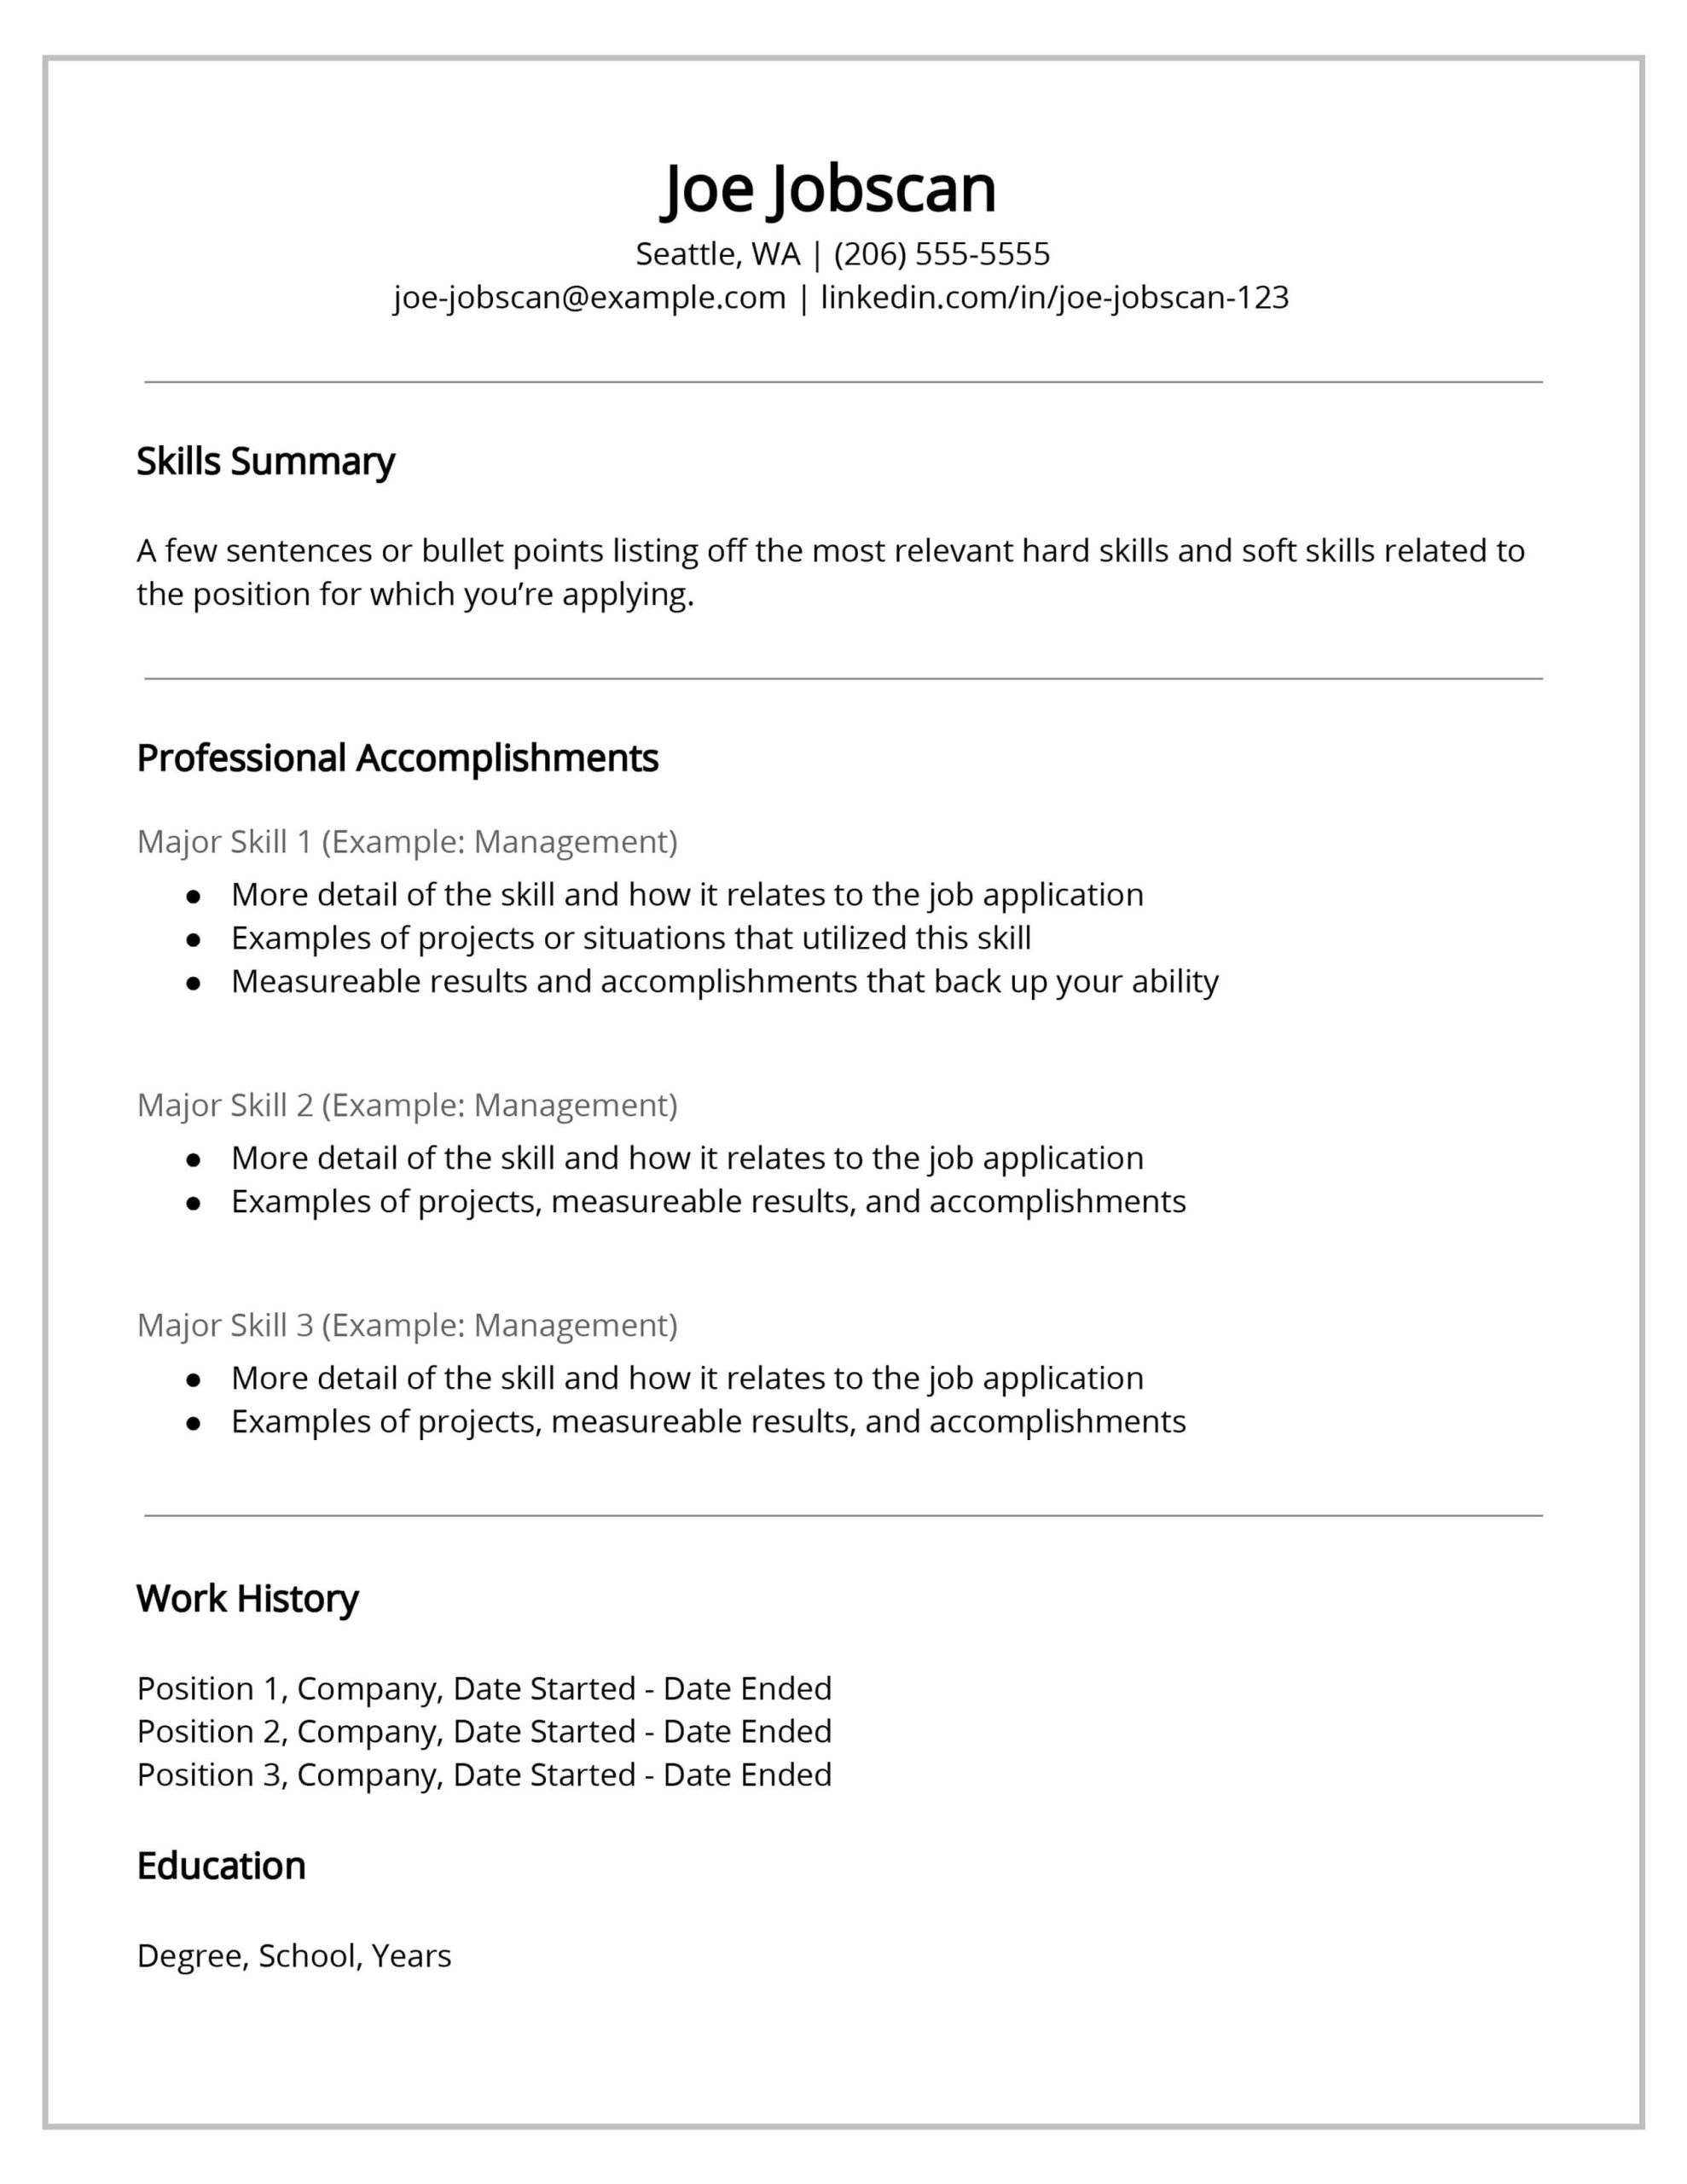 Sample Resume Images with Skills Listed Recruiters Hate the Functional Resume formatâdo This Instead